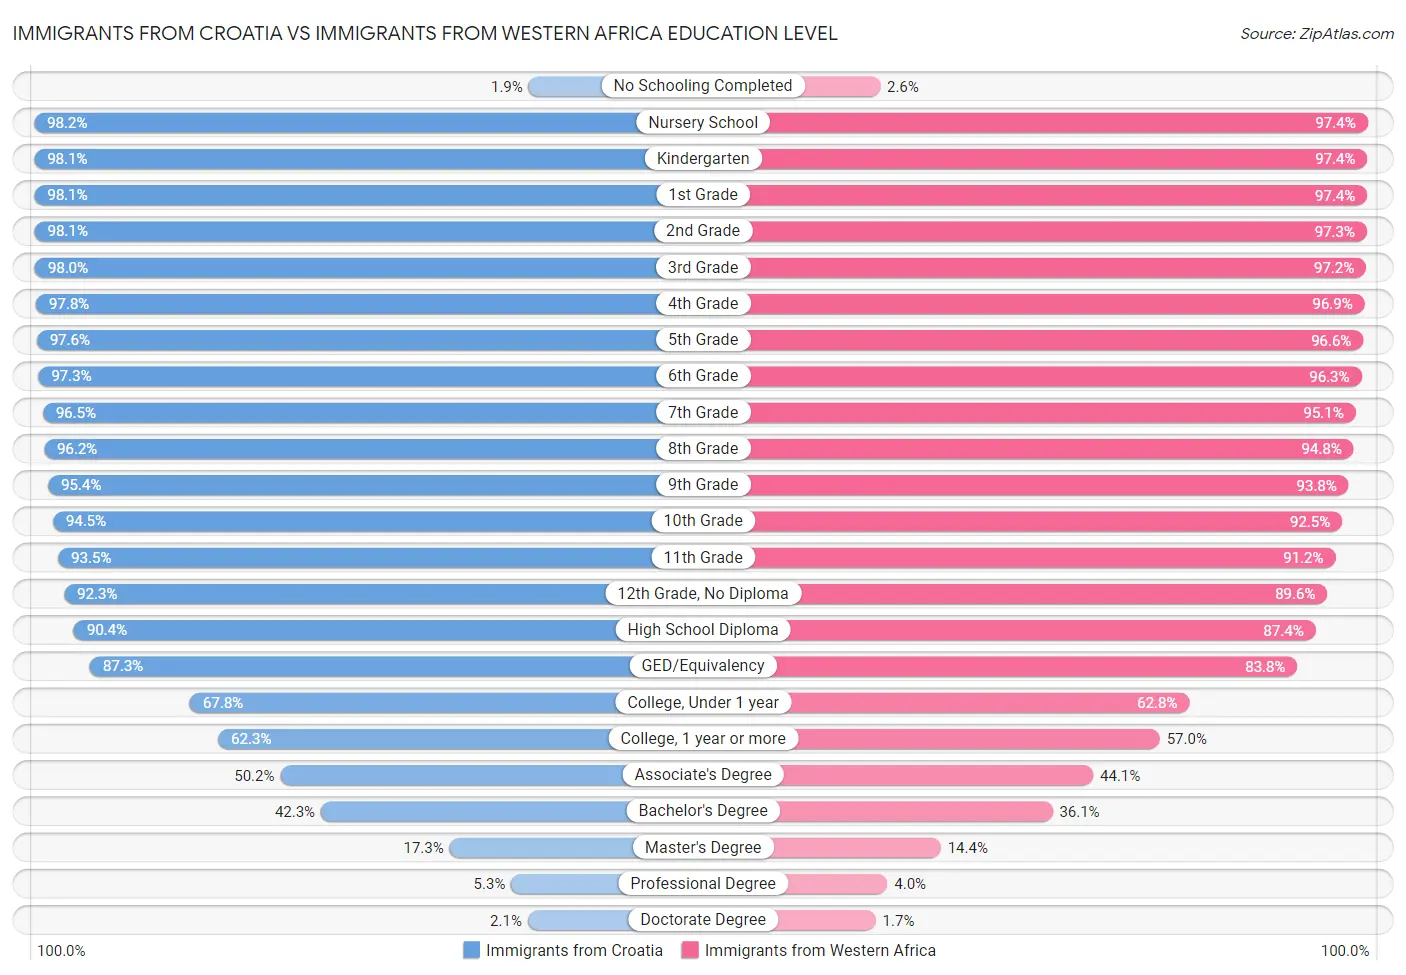 Immigrants from Croatia vs Immigrants from Western Africa Education Level